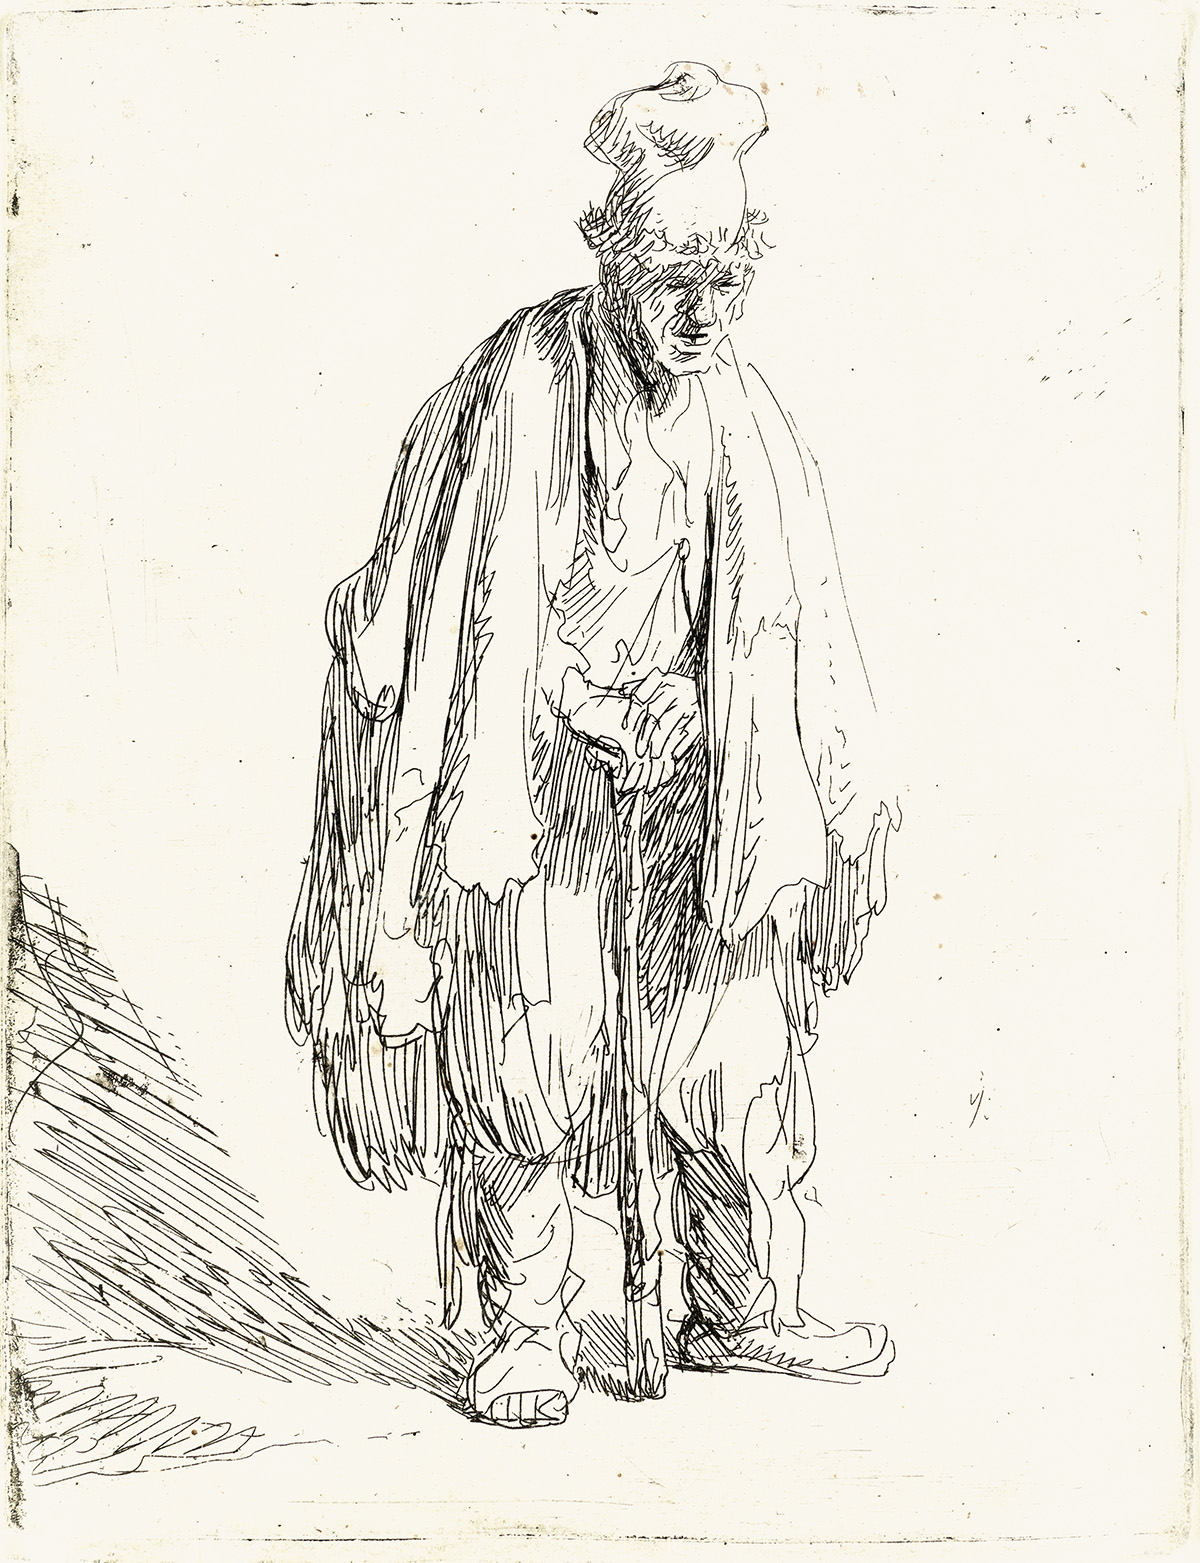 REMBRANDT VAN RIJN A Beggar in a High Cap, Standing and Leaning on a Stick.